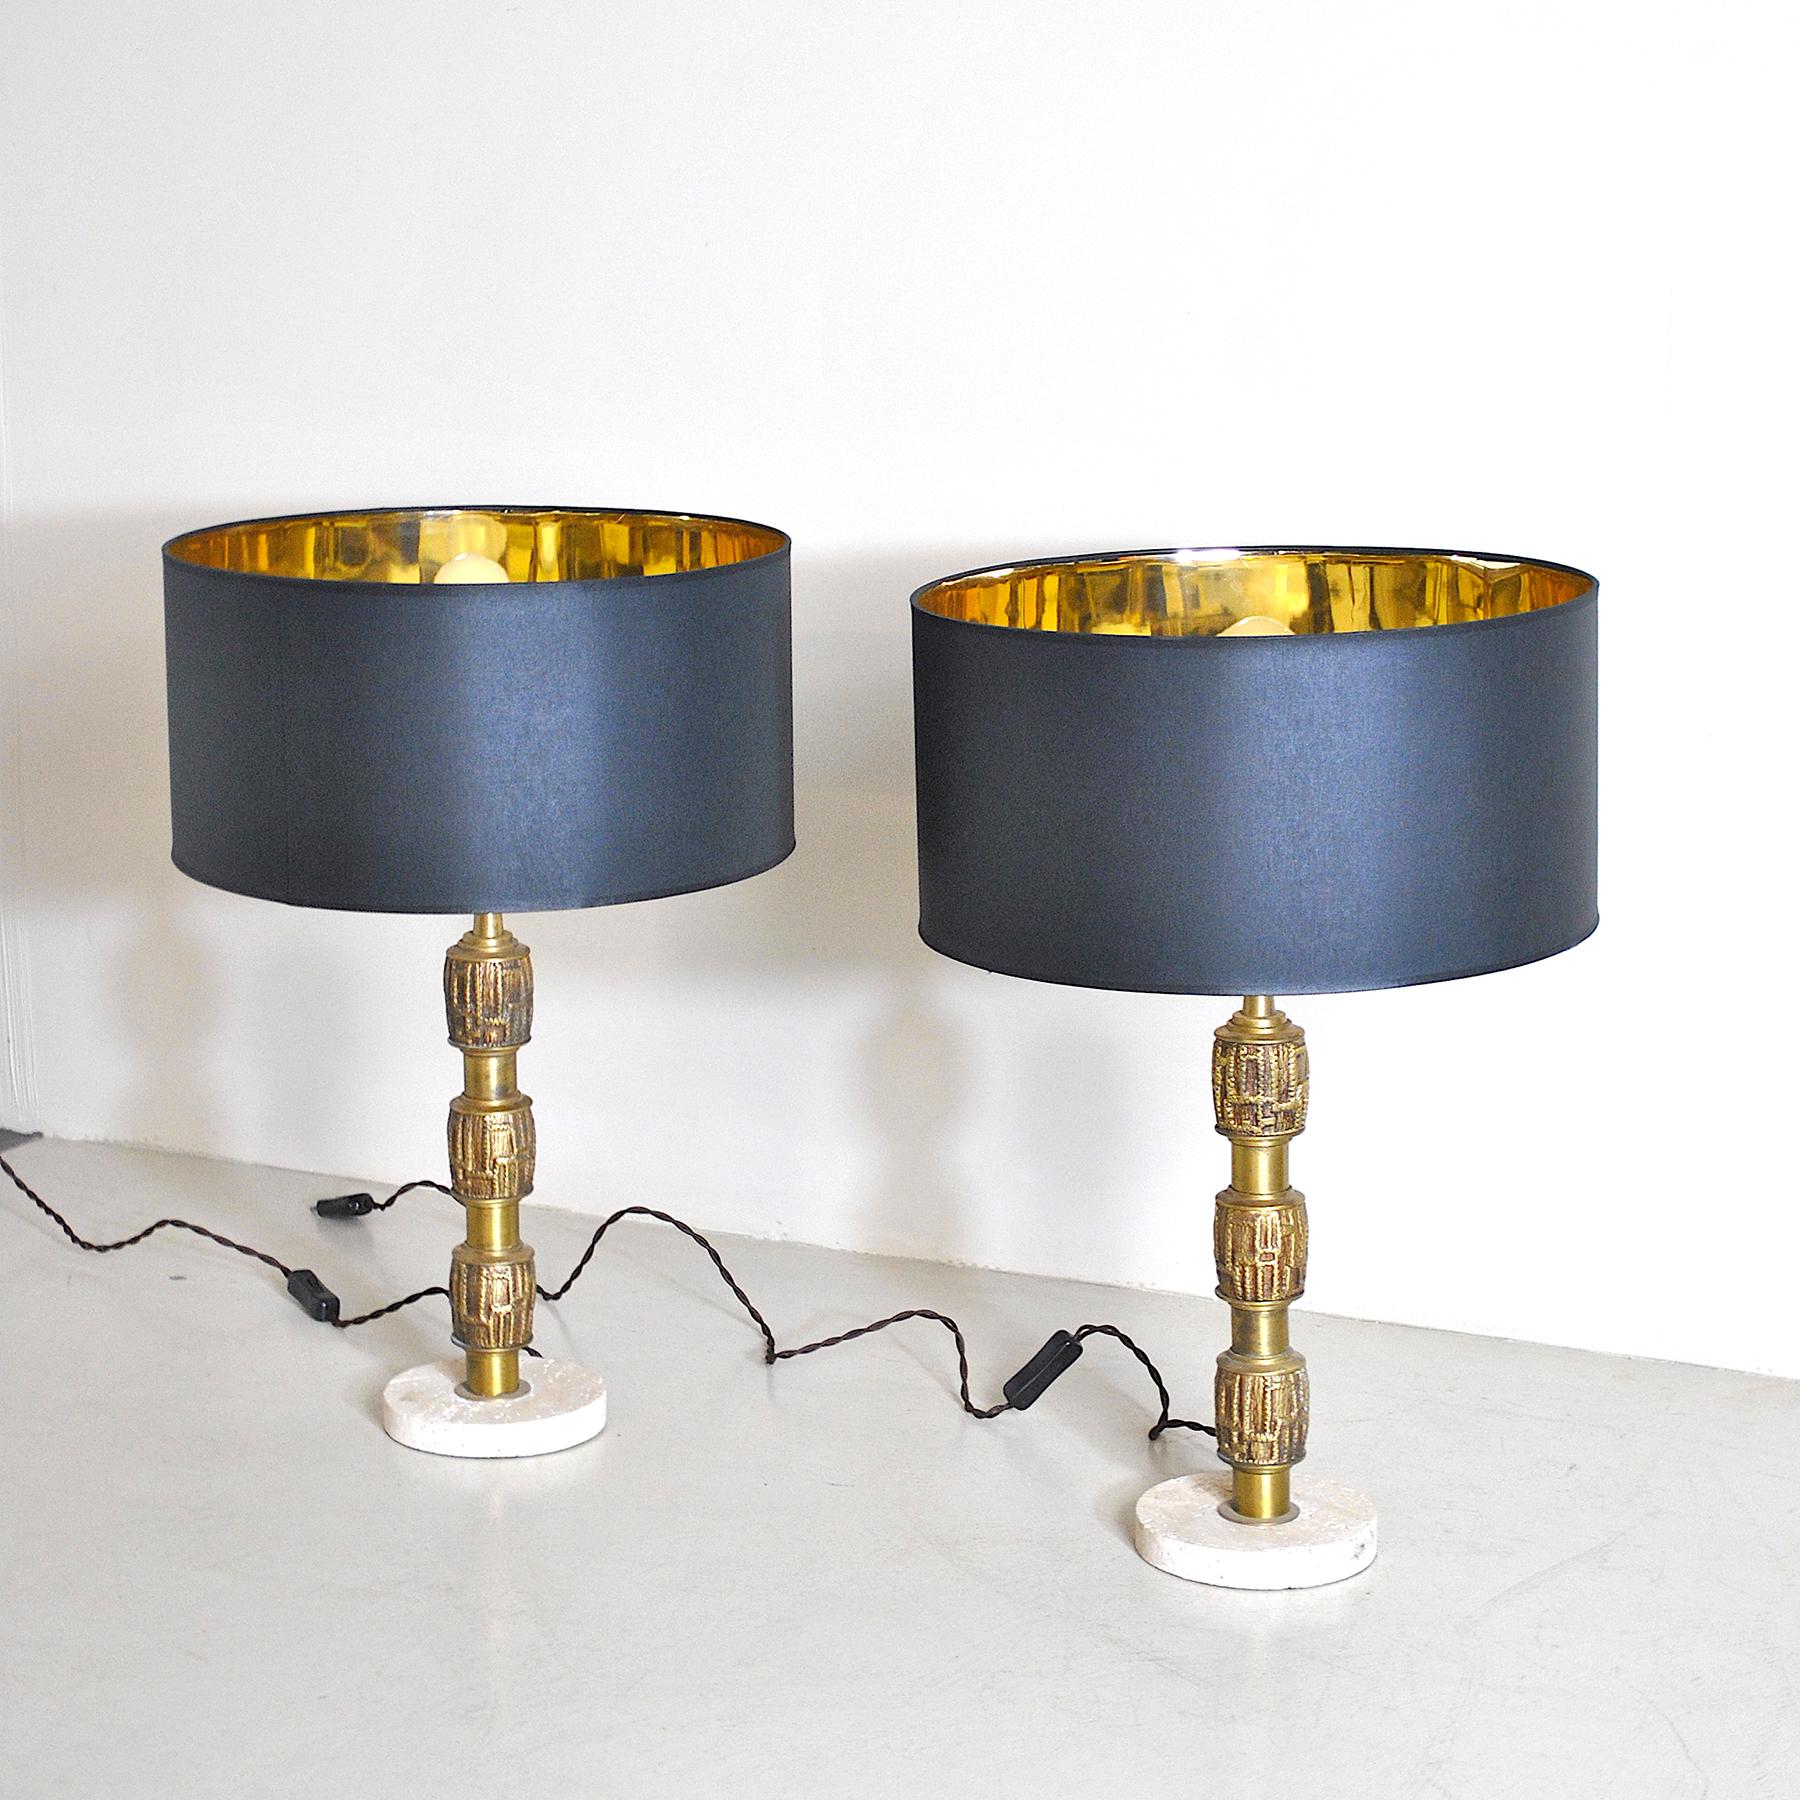 Italian Luciano Frigerio Set of Midcentury Table Lamps in Brass and Travertine, 1970s For Sale